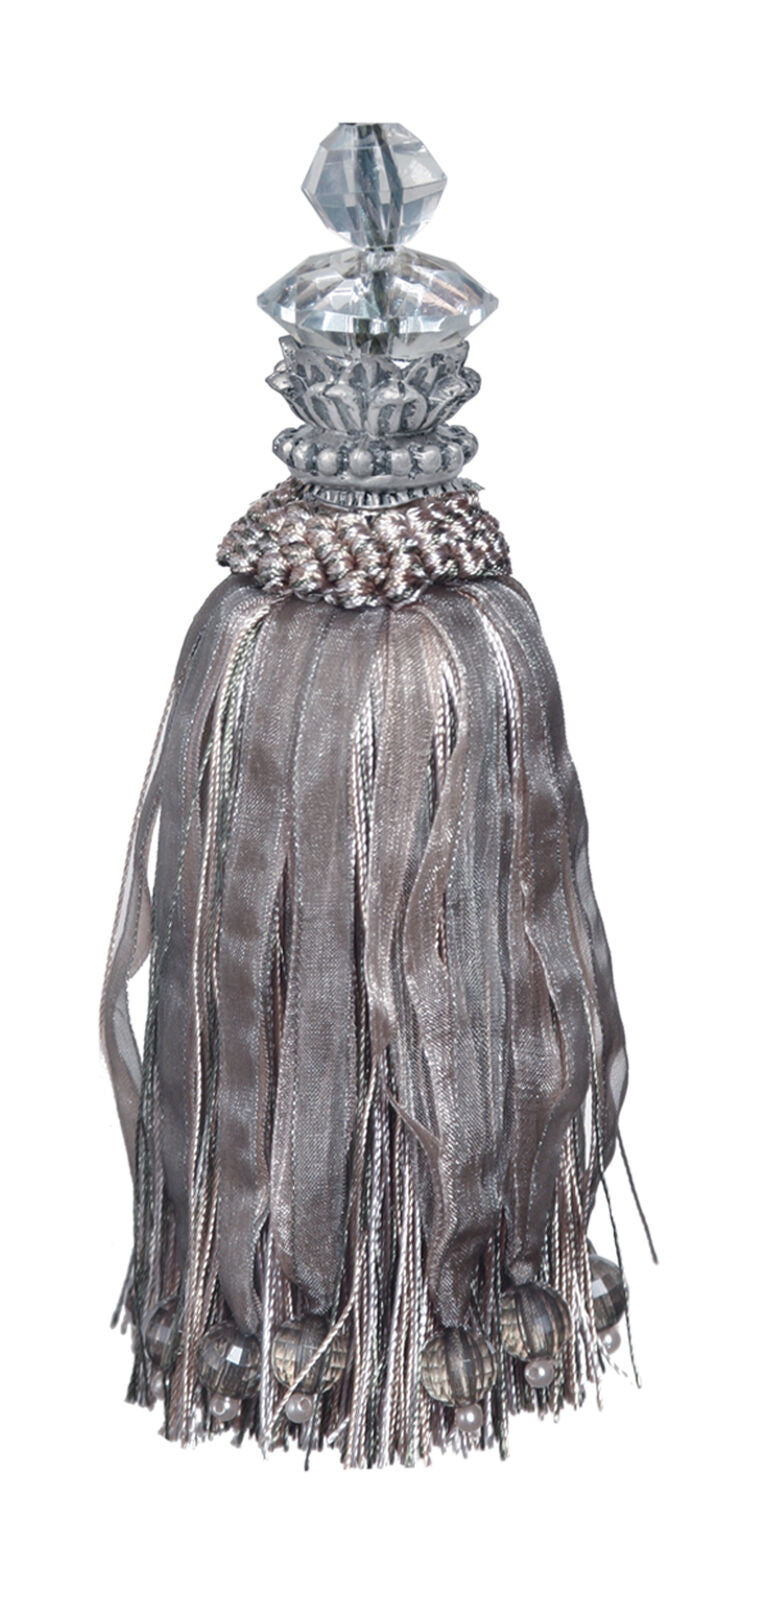 Large Tassel with Glass Bead in Tulip Top - Silver Grey - Decorative Tassel for Antique Key or Door BSST01